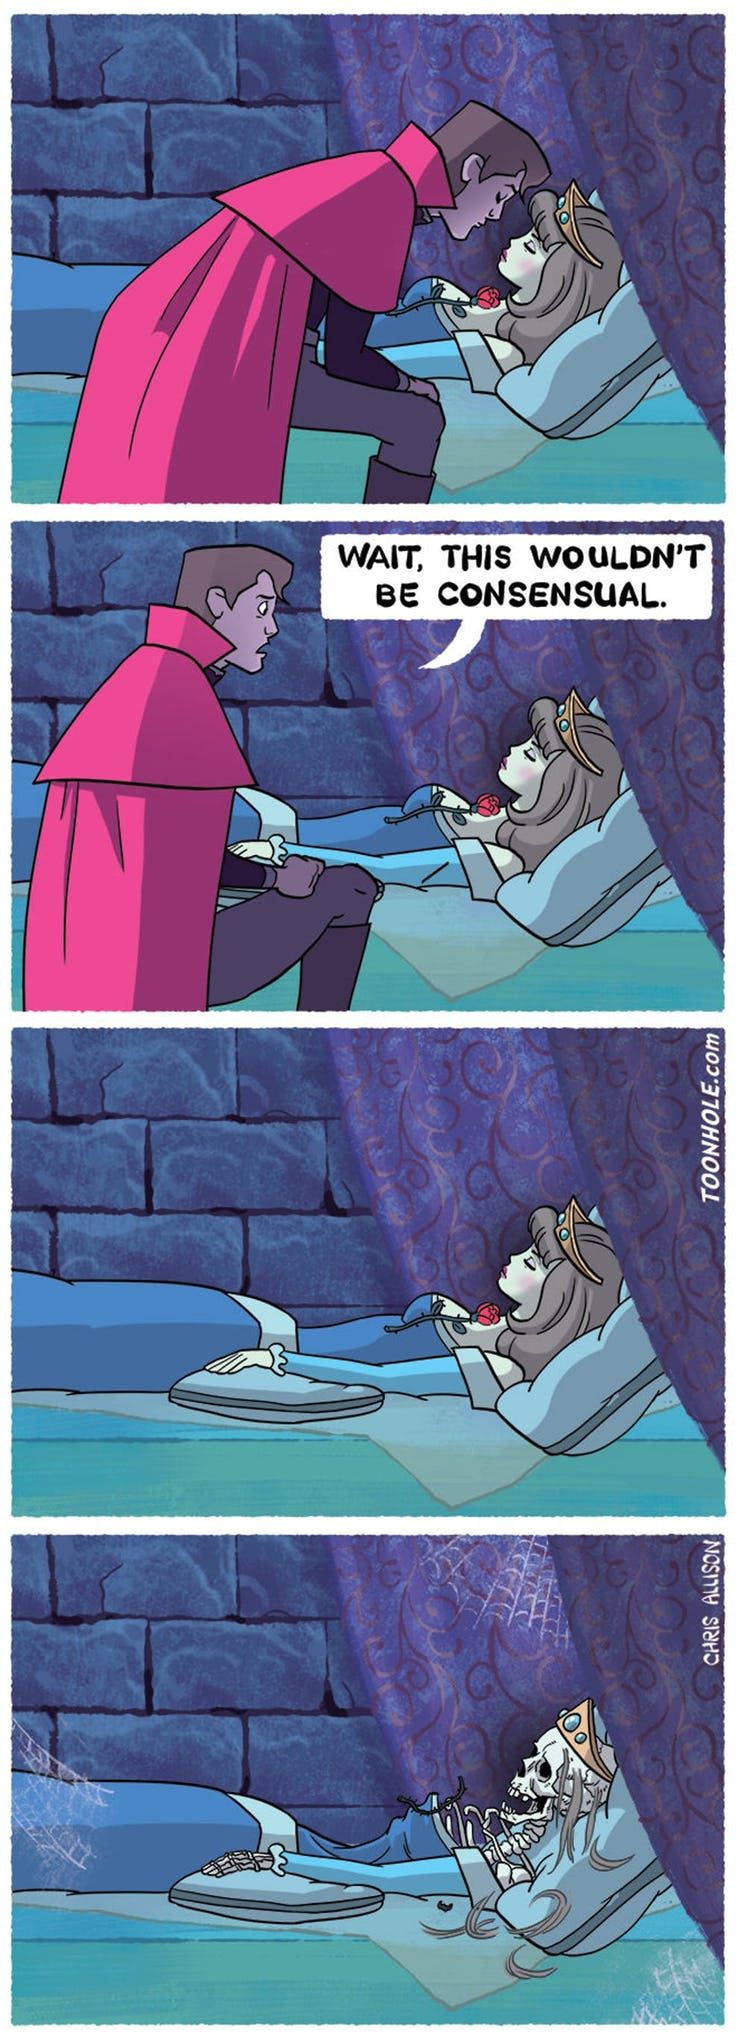 21 Hilarious Disney Logic Comics That Will Make You See The Movies Differently